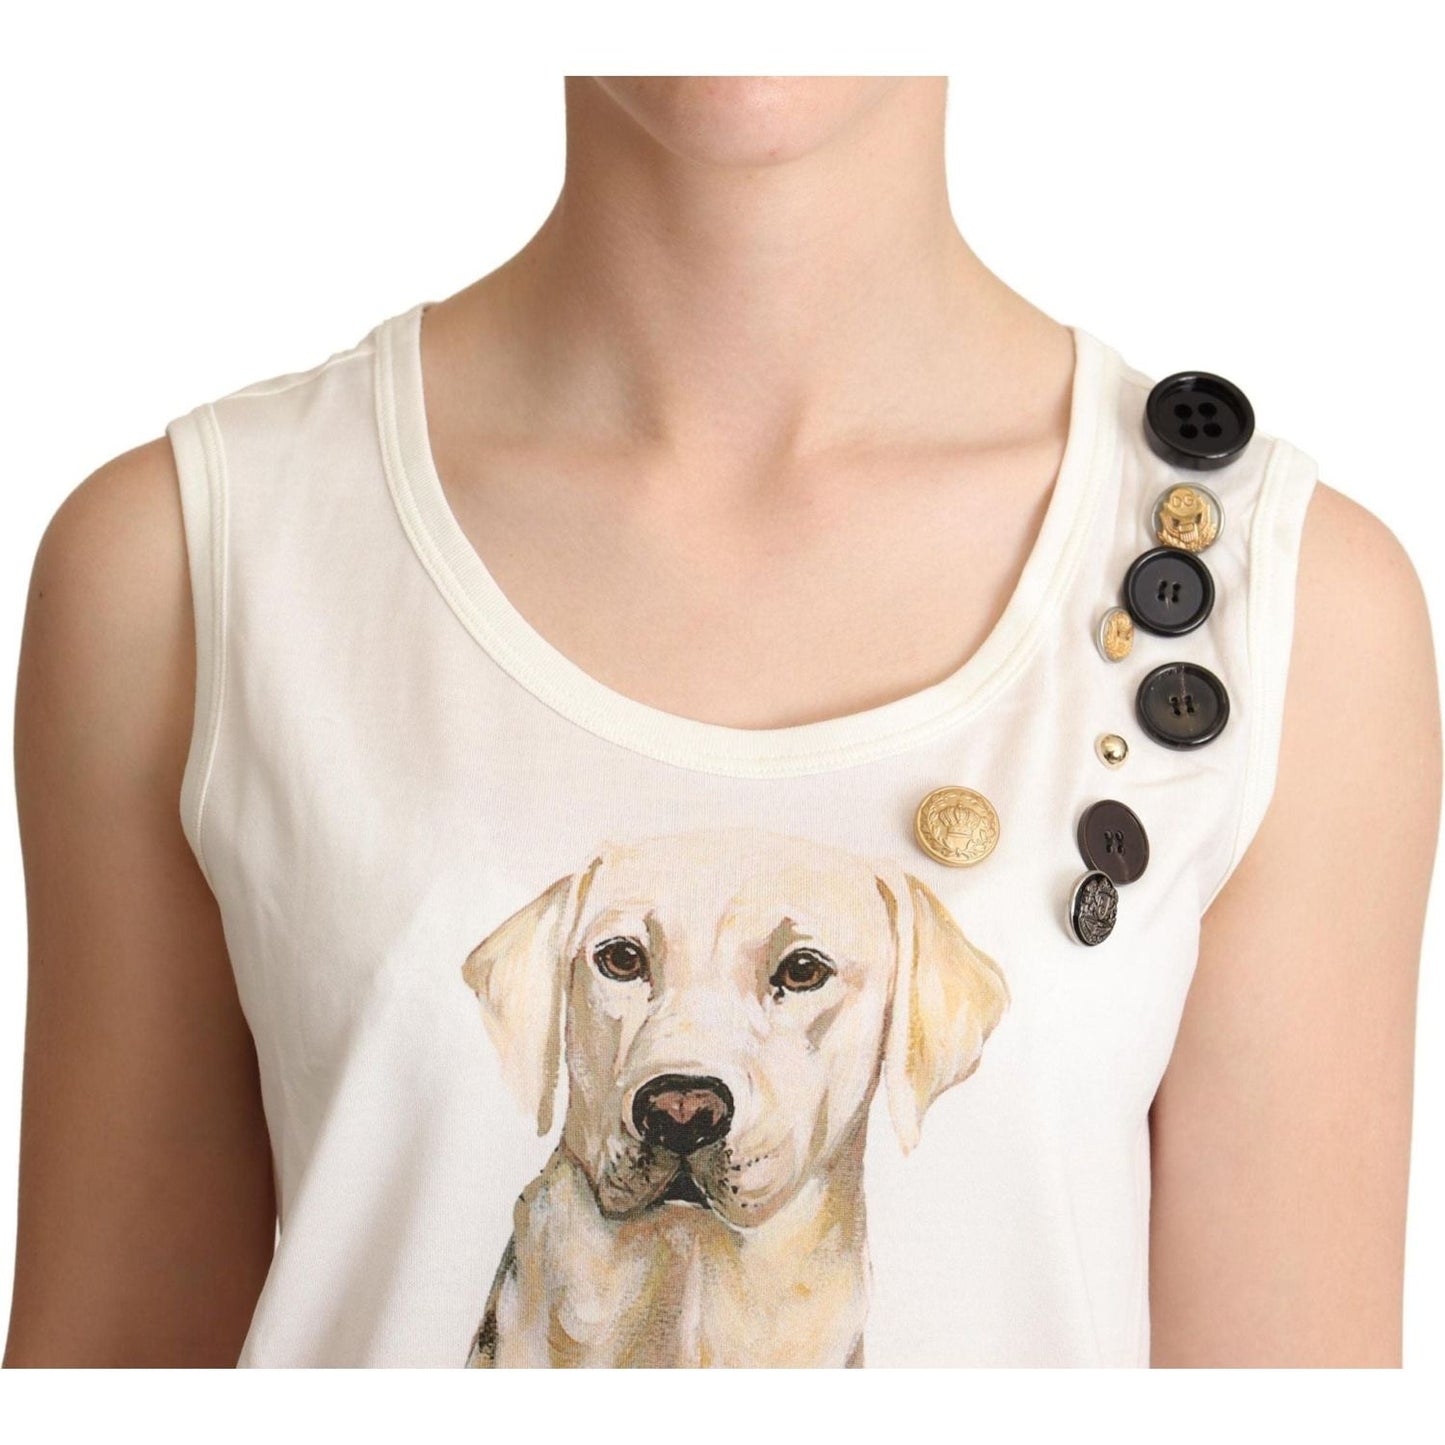 Dolce & Gabbana Chic Canine Floral Sleeveless Tank white-dog-floral-print-embellished-t-shirt